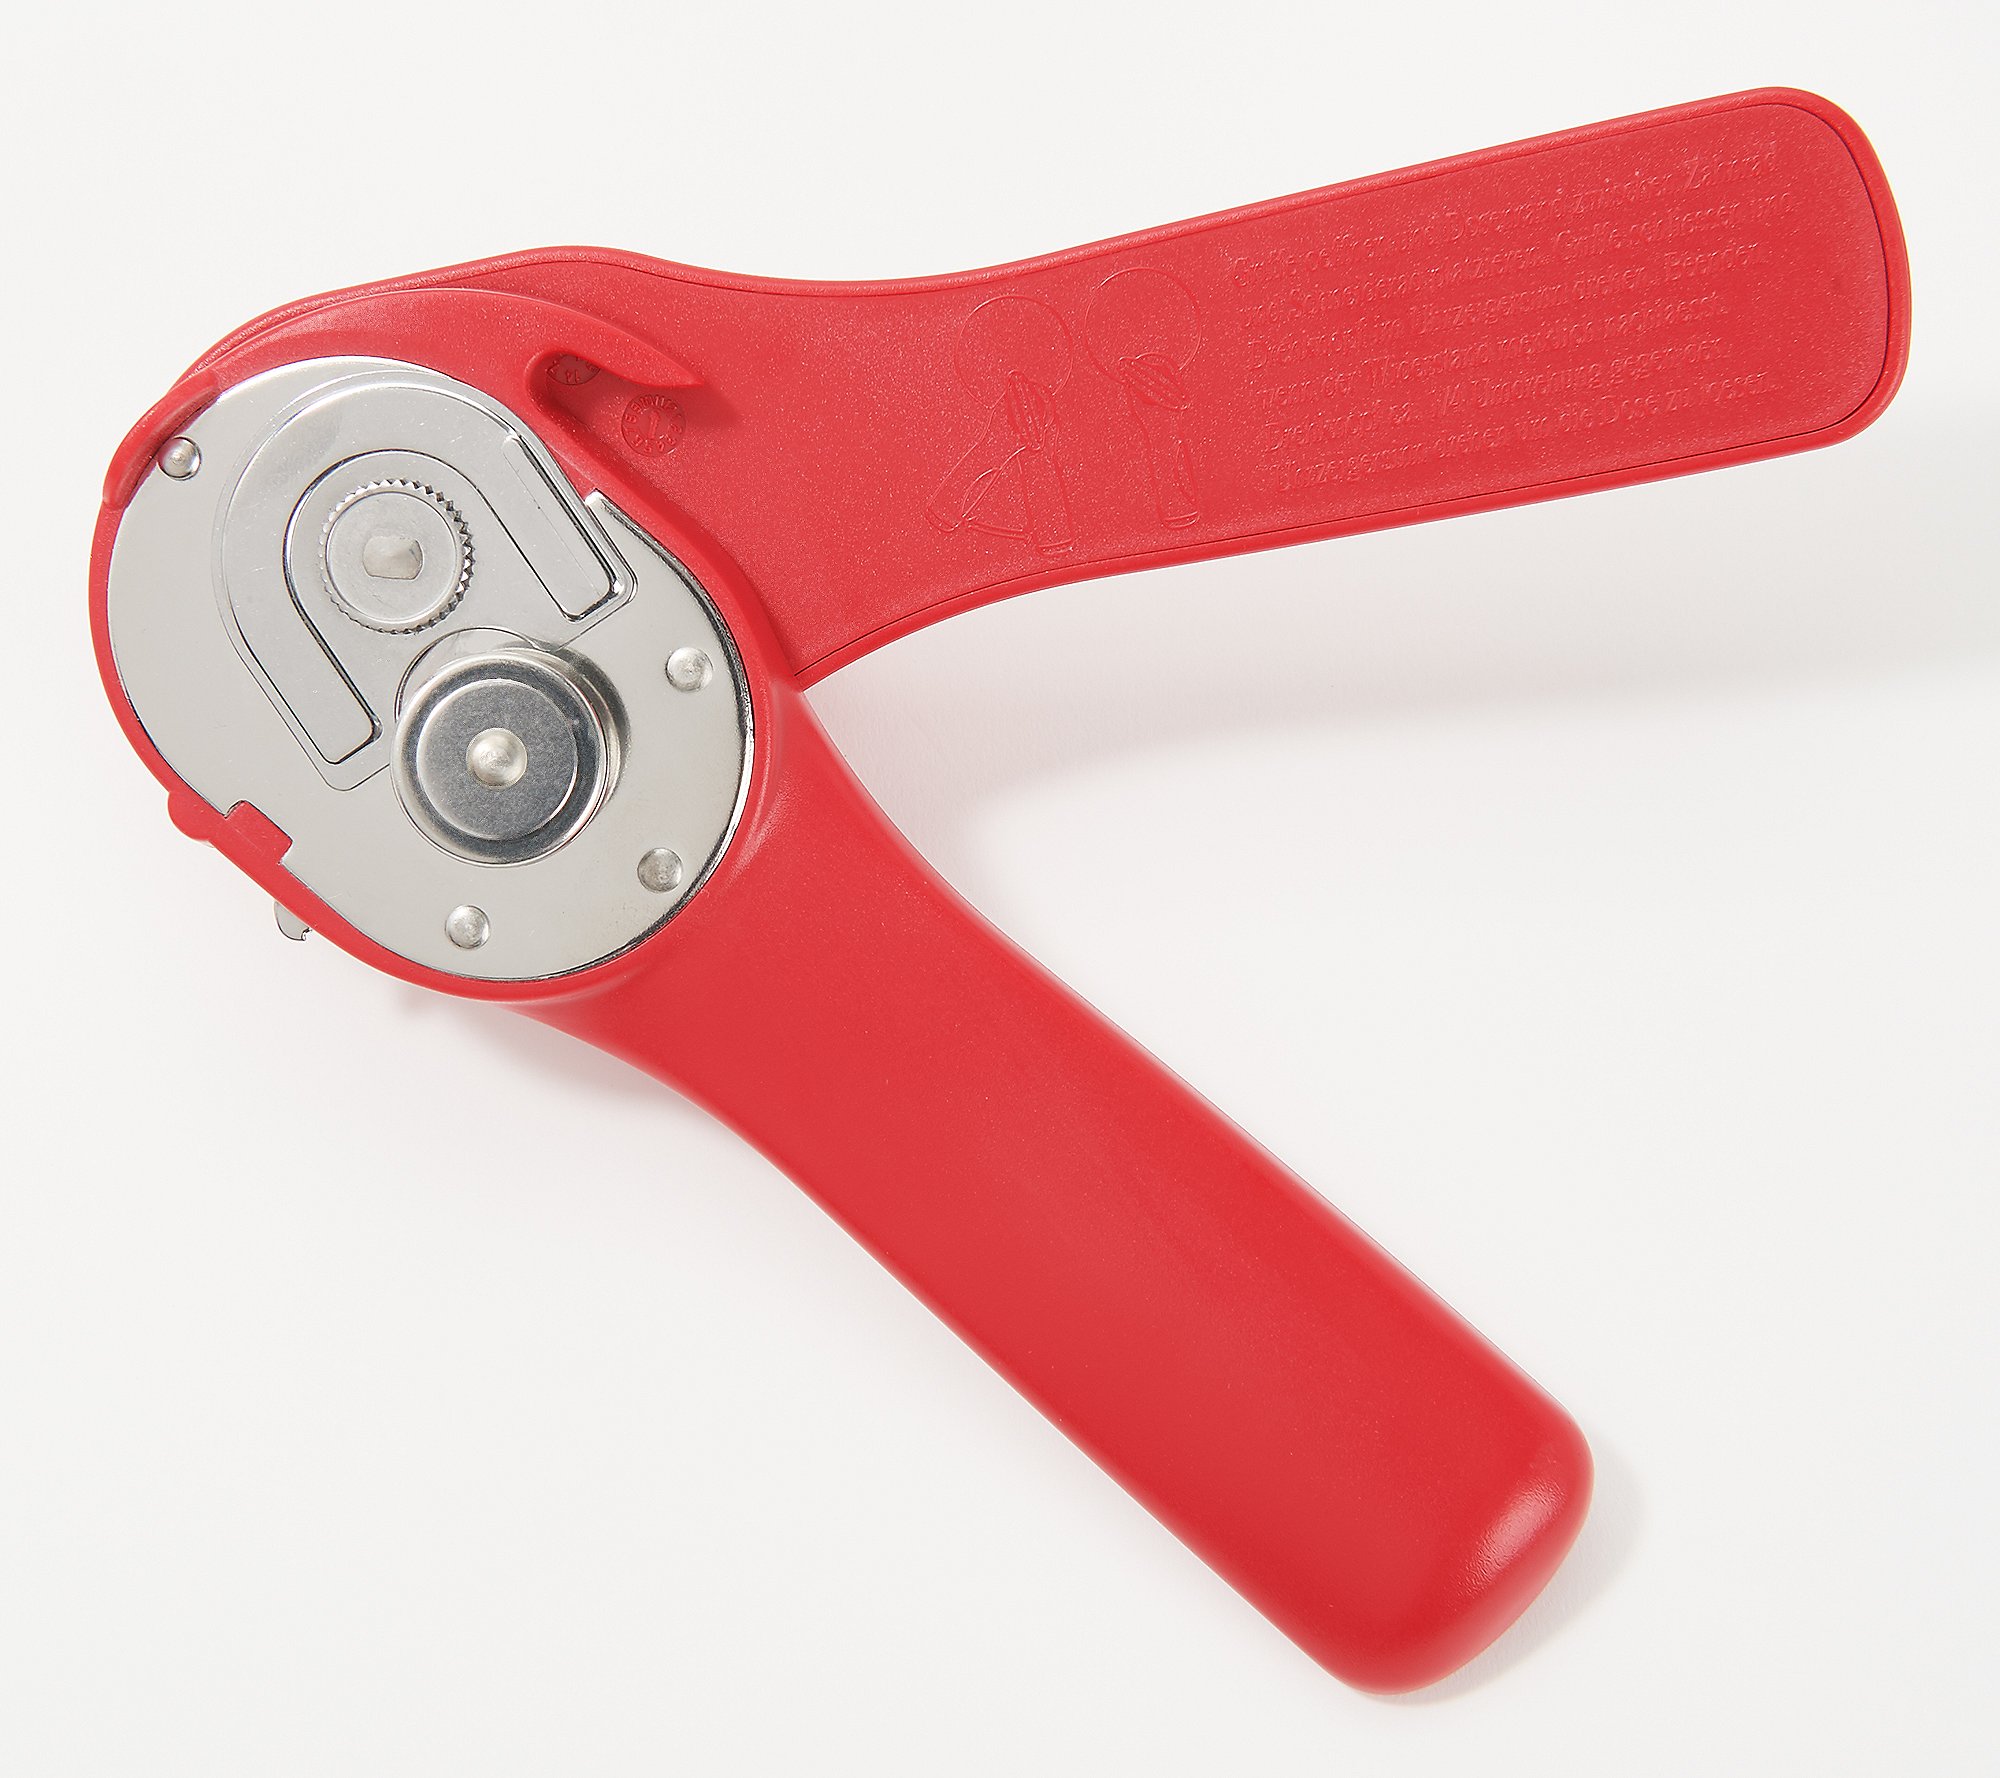 Kuhn Rikon 2-in-1 Safety Can Opener with Pull Tab - QVC.com